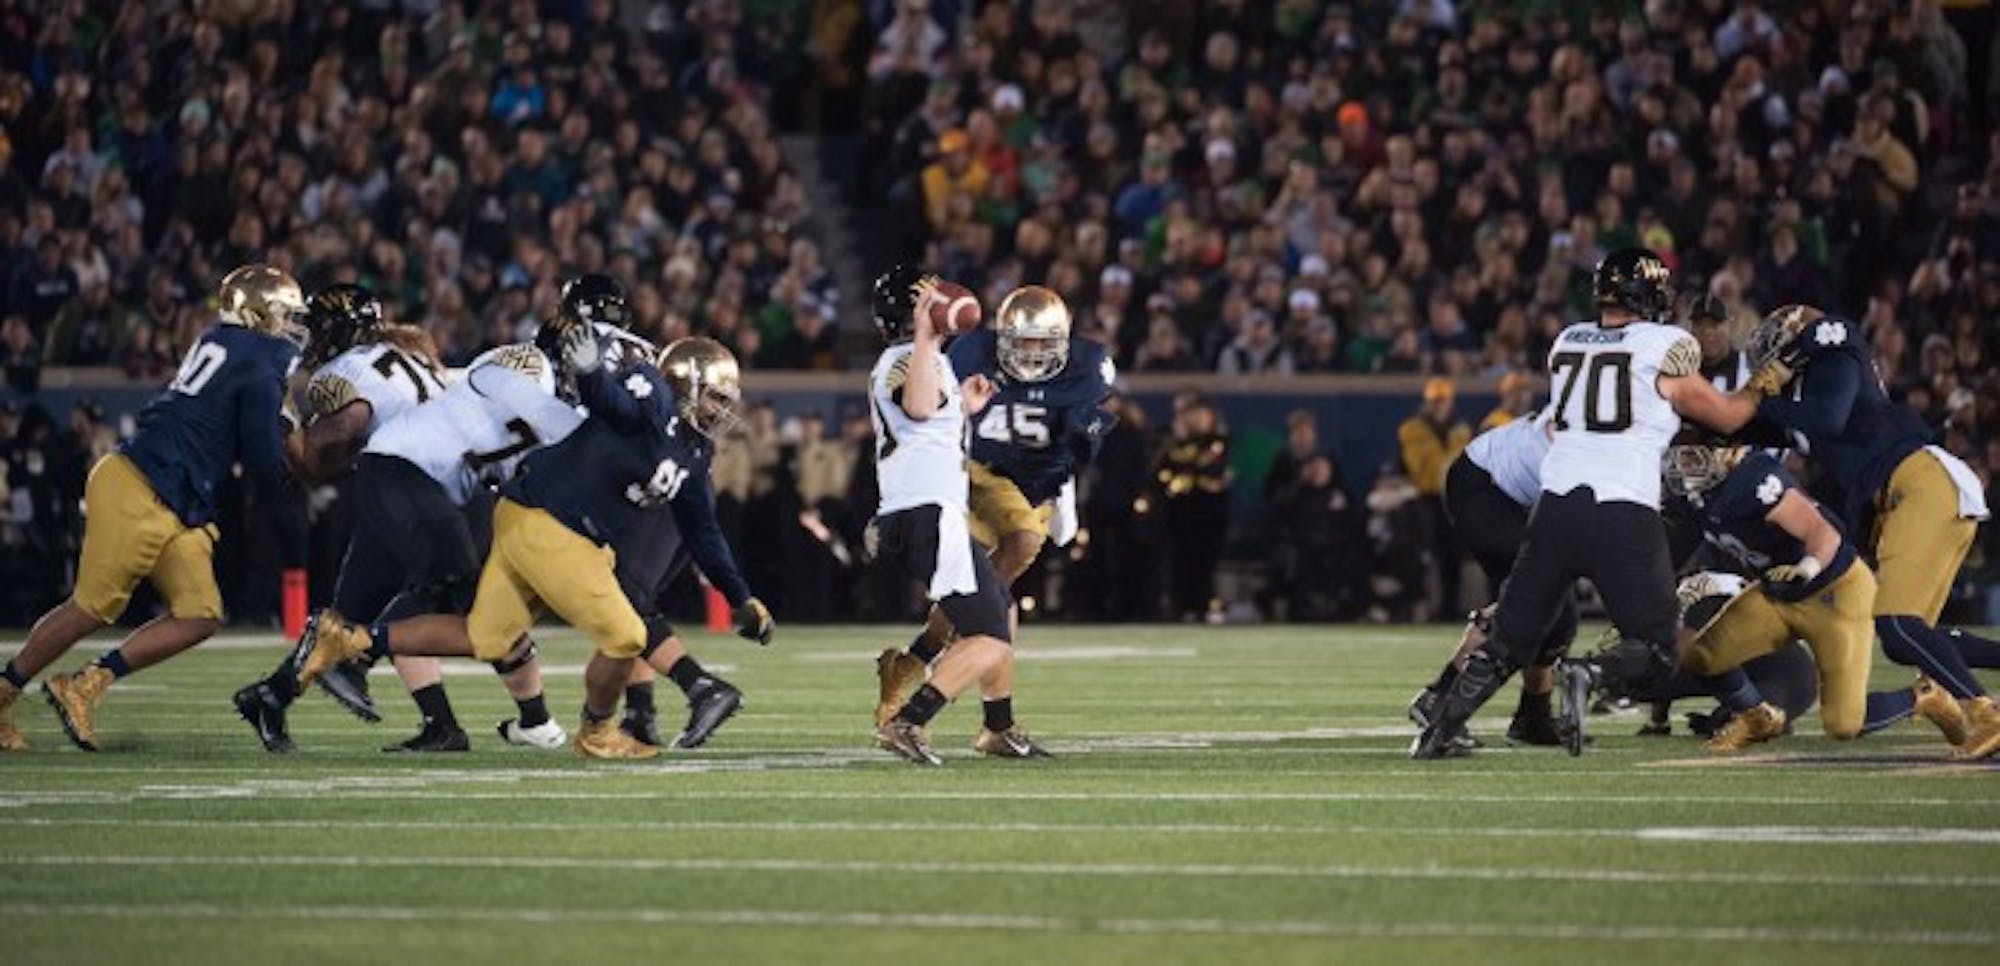 Senior defensive lineman Romeo Okwara pressures the quarterback during Notre Dame’s 28-7 victory over Wake Forest on Saturday.